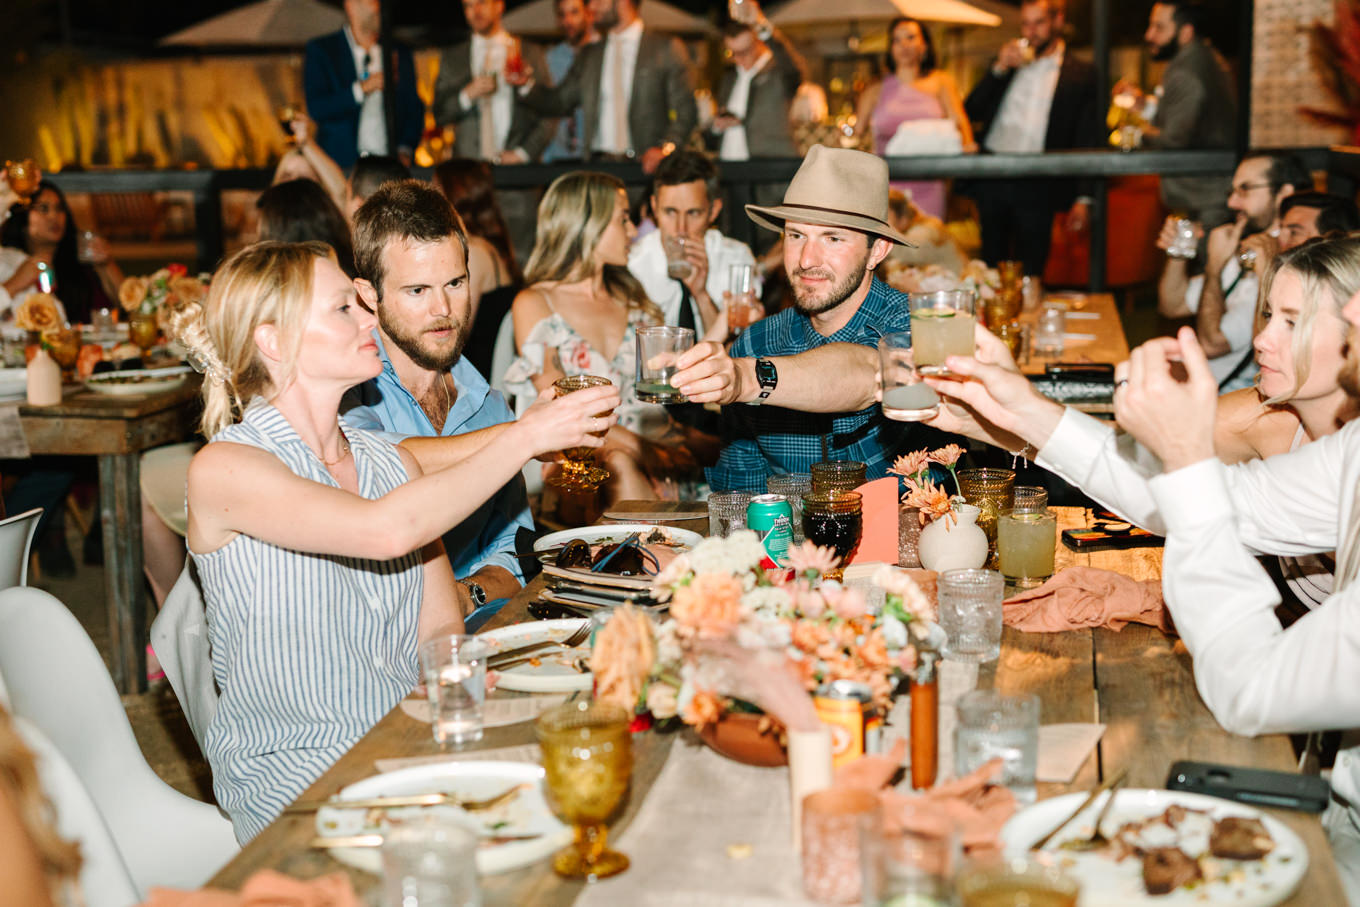 Toast at wedding reception | Pink and orange Lautner Compound wedding | Colorful Palm Springs wedding photography | #palmspringsphotographer #palmspringswedding #lautnercompound #southerncaliforniawedding  Source: Mary Costa Photography | Los Angeles